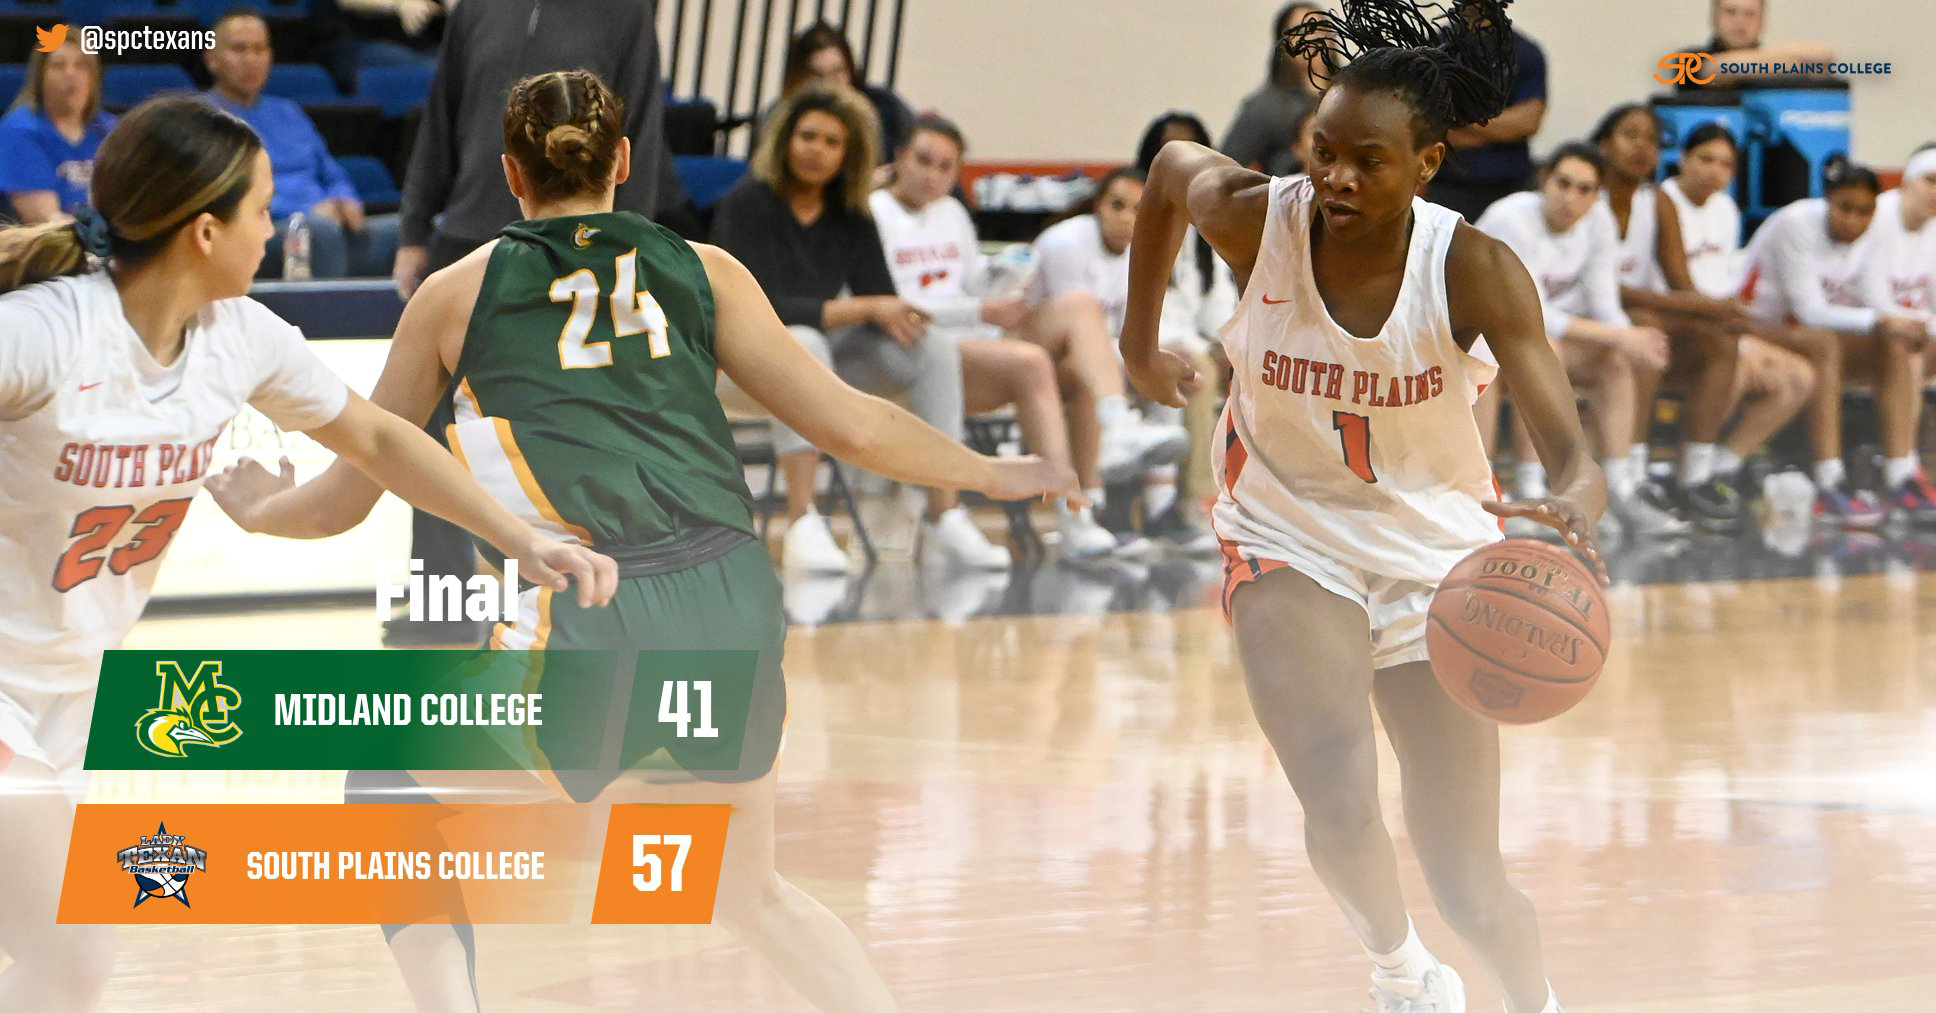 Lady Texans win seventh straight, top Midland 57-41 Saturday